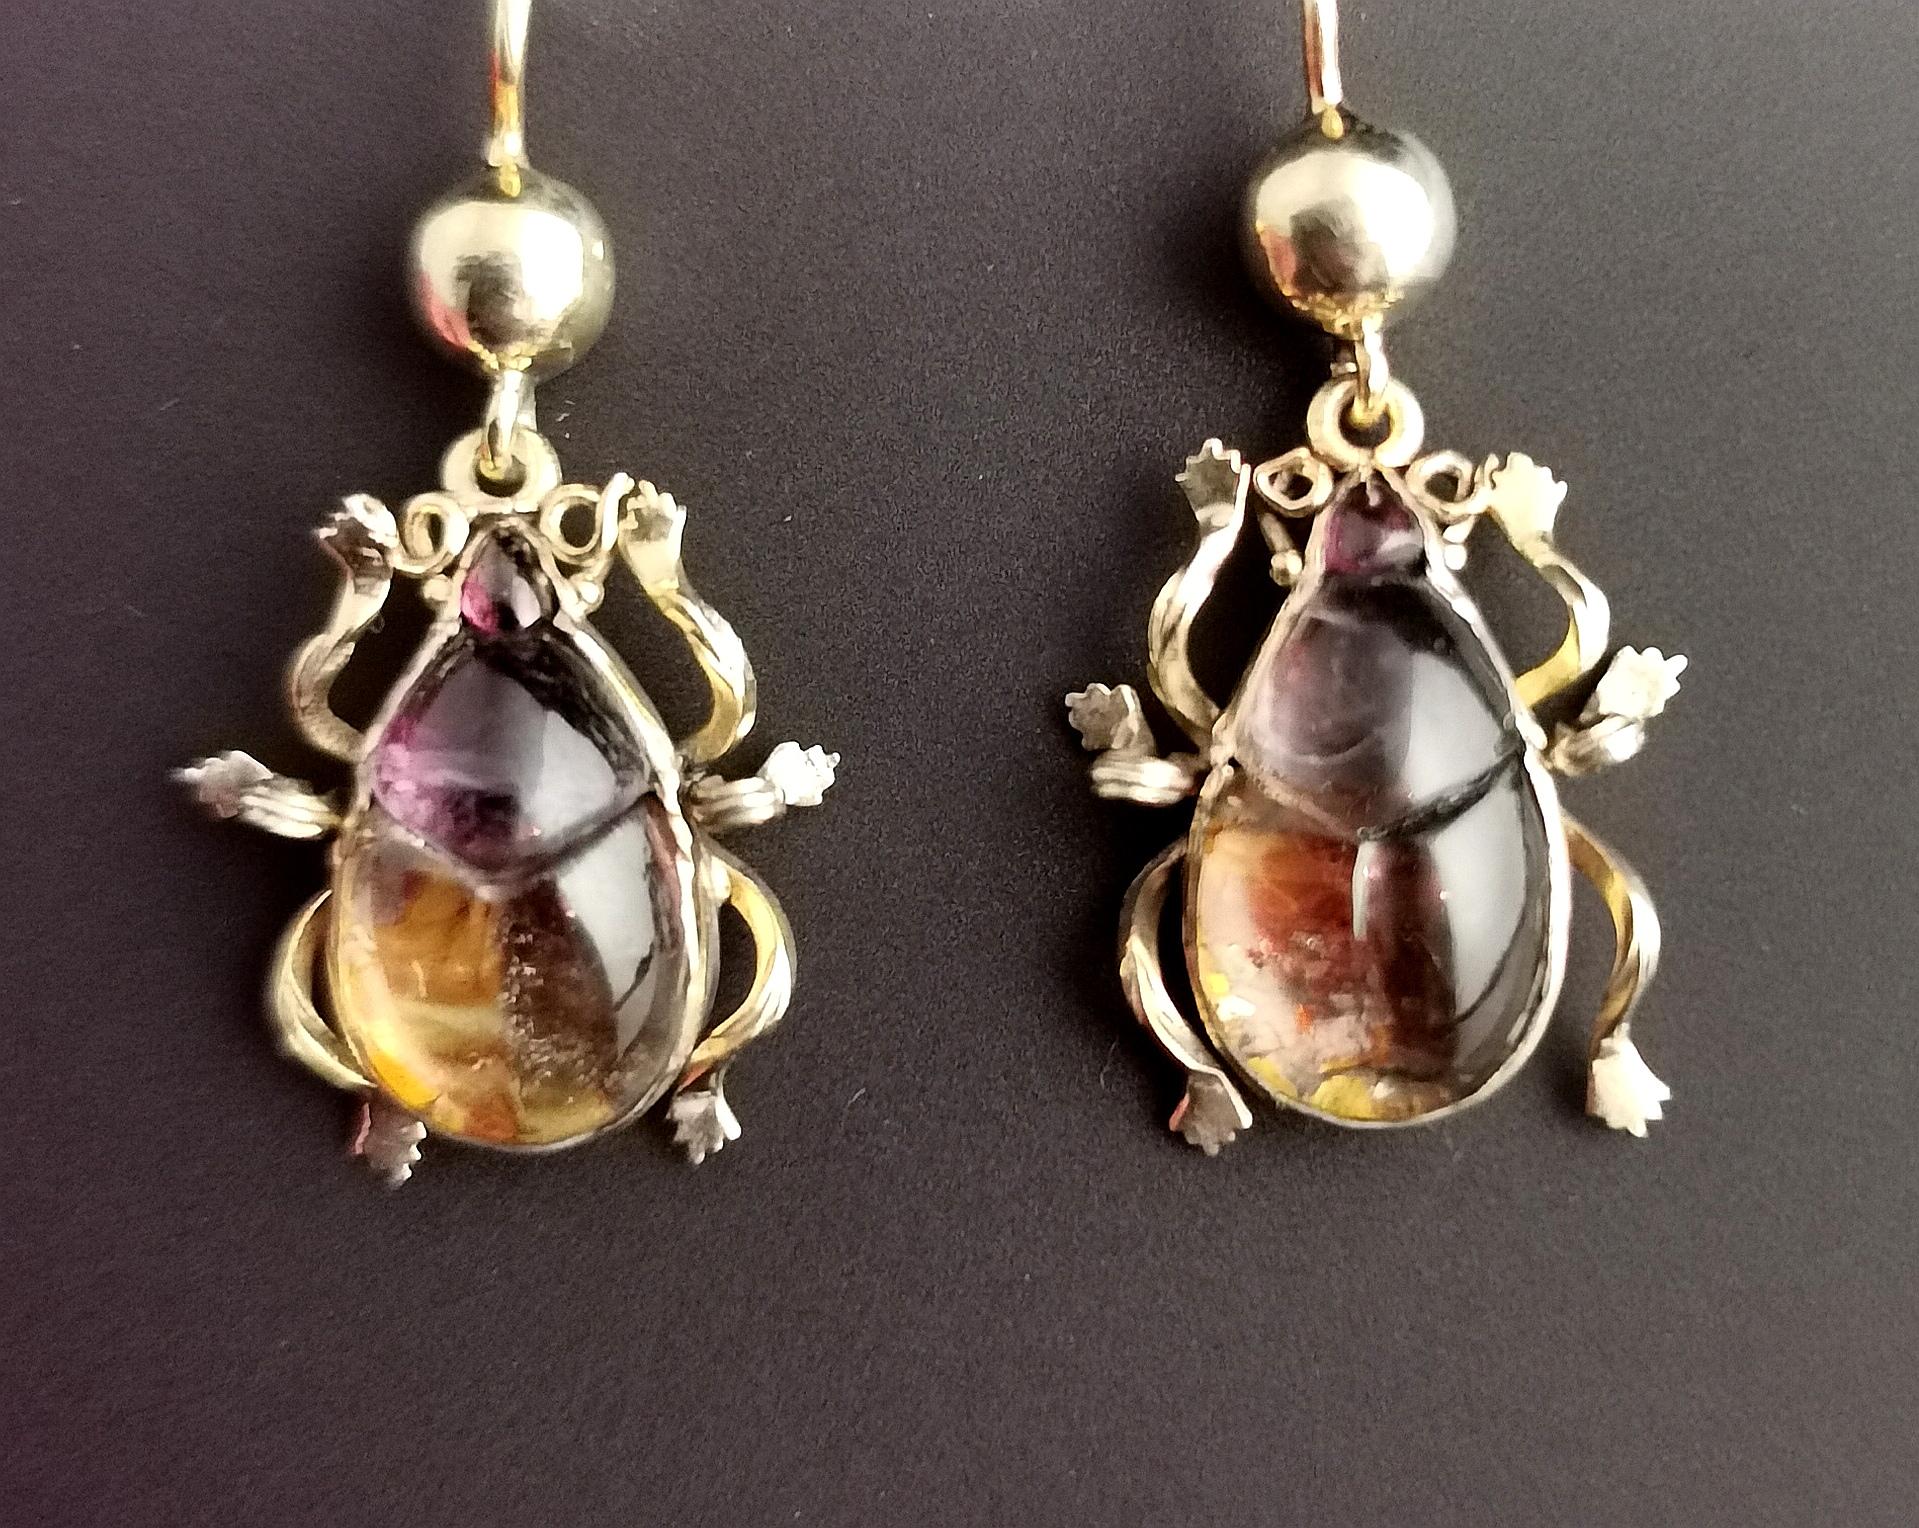 A Beautiful and rare pair of Antique Victorian earrings.

This pair of earrings are just exceptional, designed as beetles they are crafted in 9kt yellow gold with ear wire fasteners.

The beetles are made up from foiled Rock crystal stones with